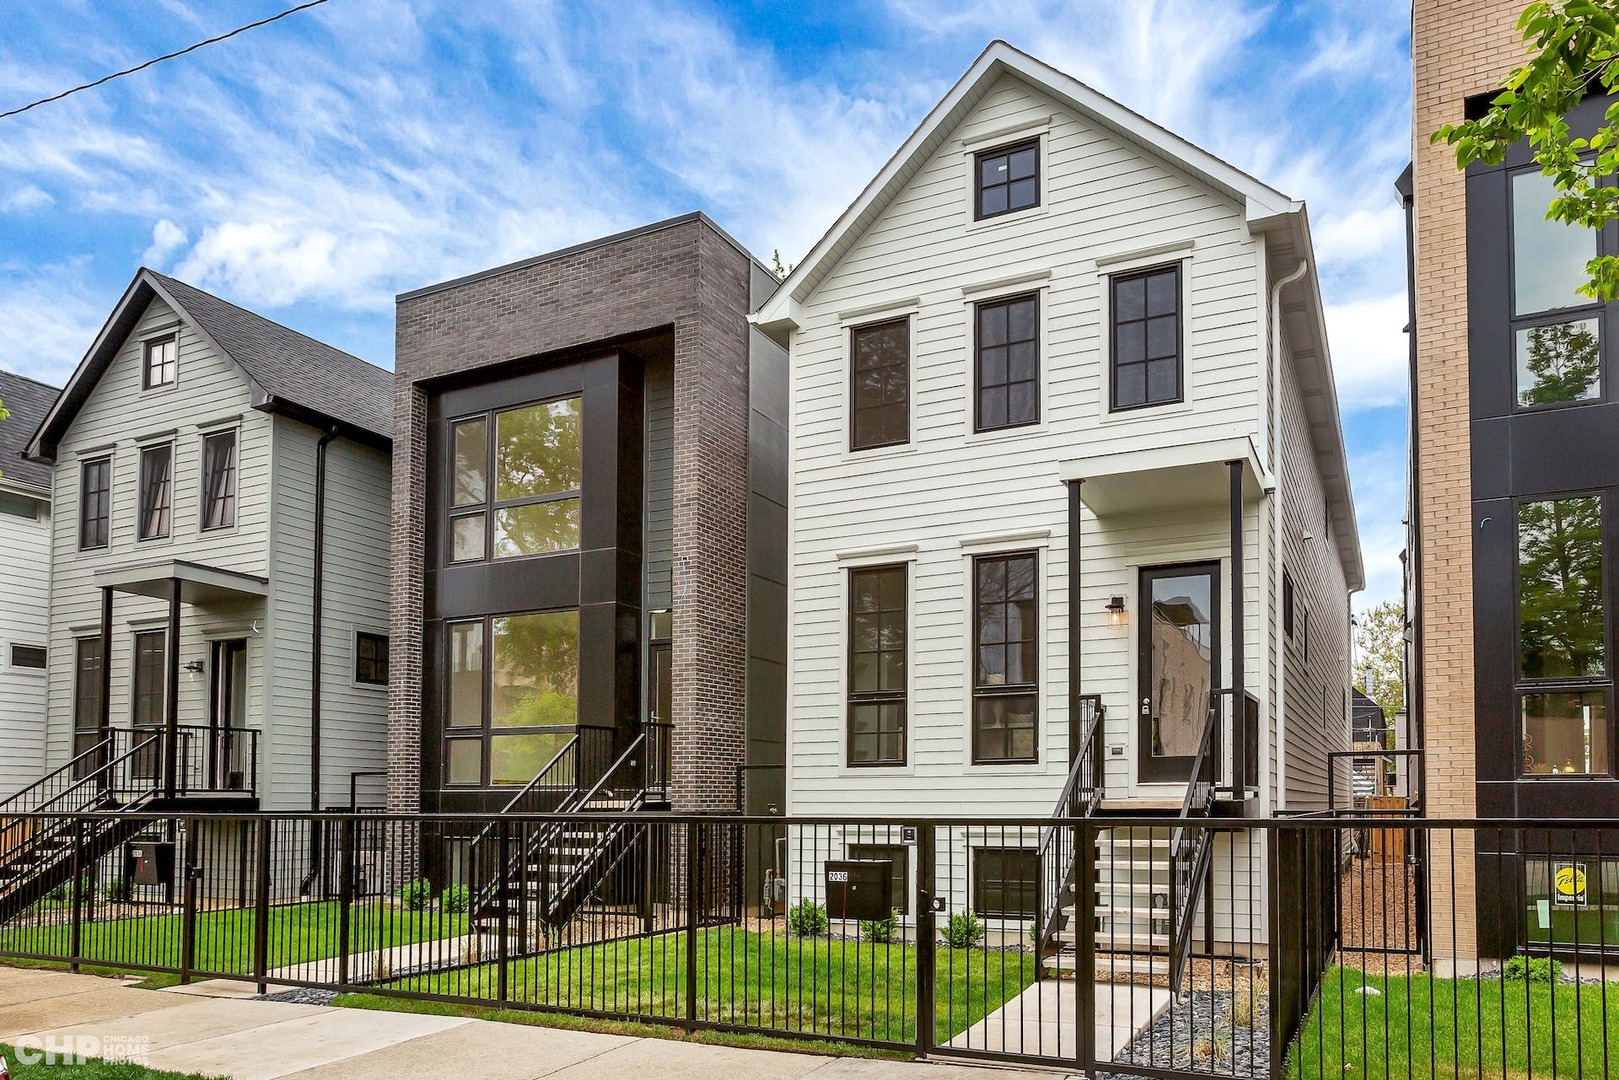 5 House in Logan Square